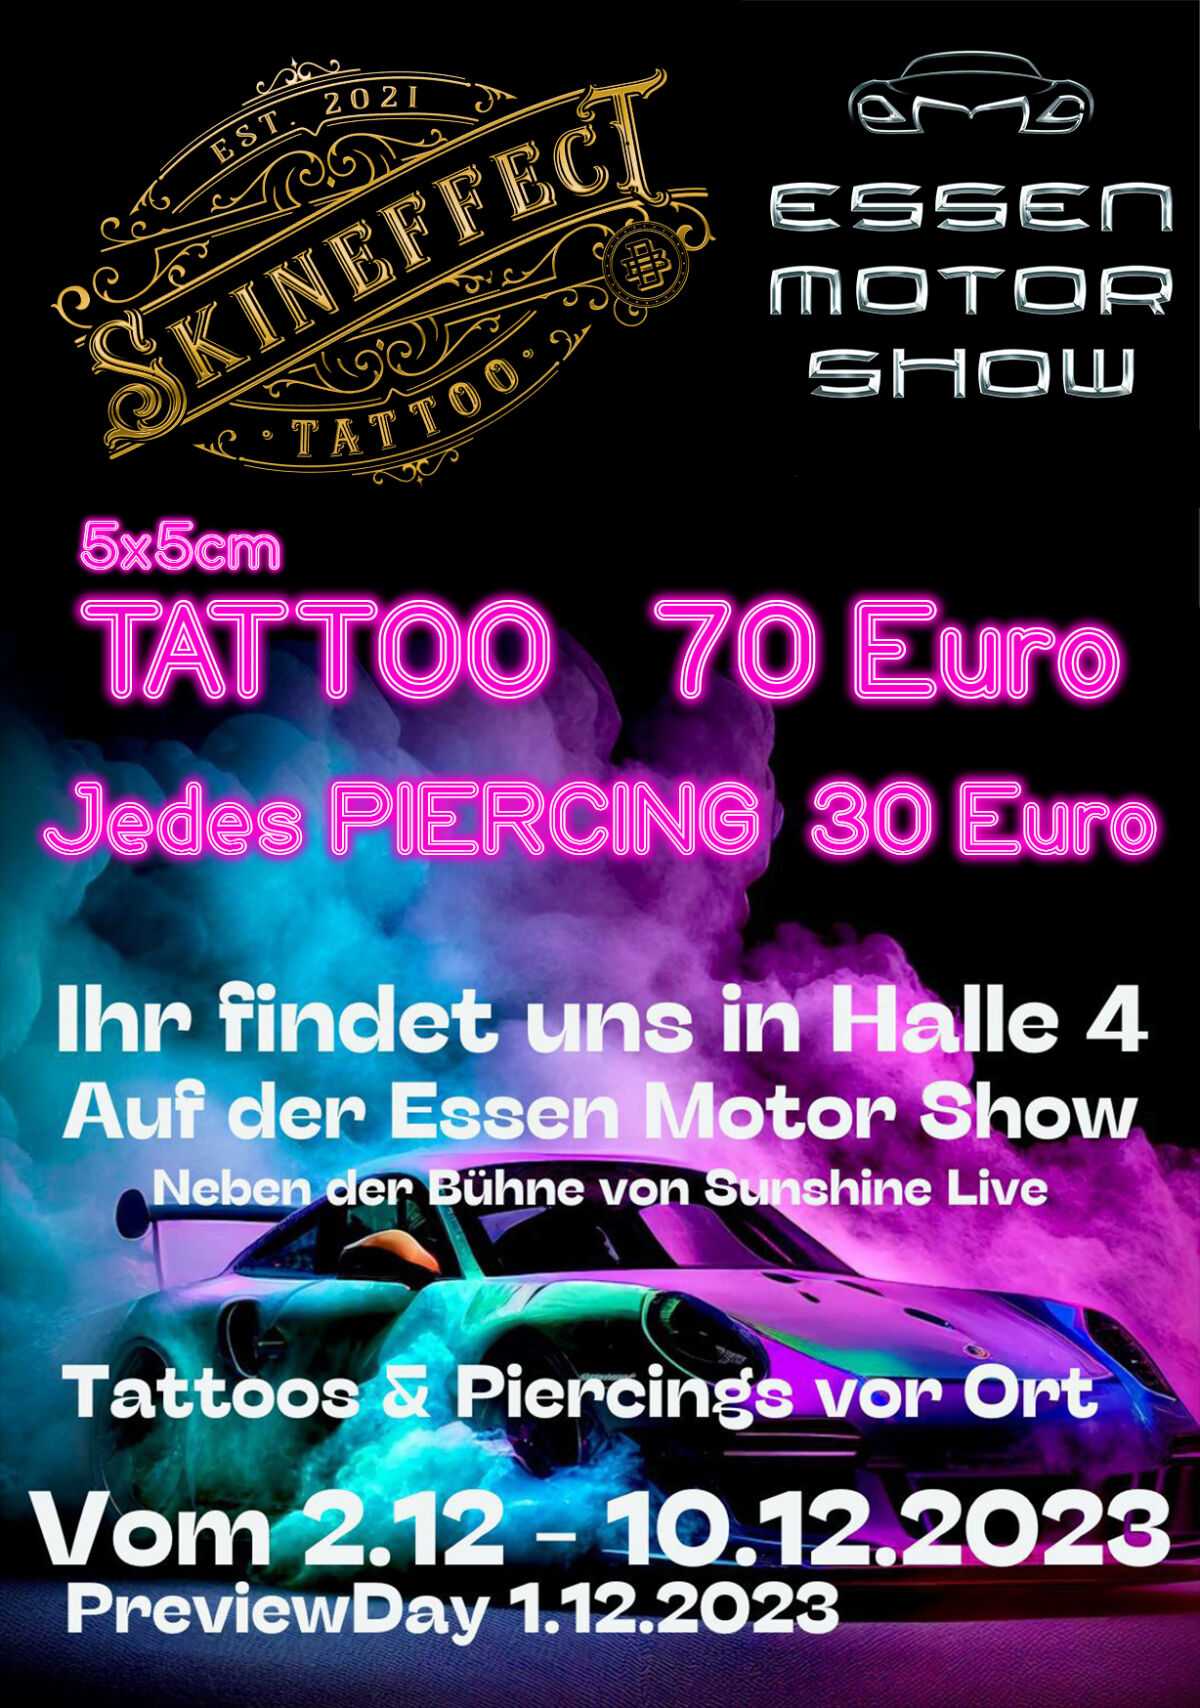 TATTOOS & PIERCINGS Live on site at EMS 2023